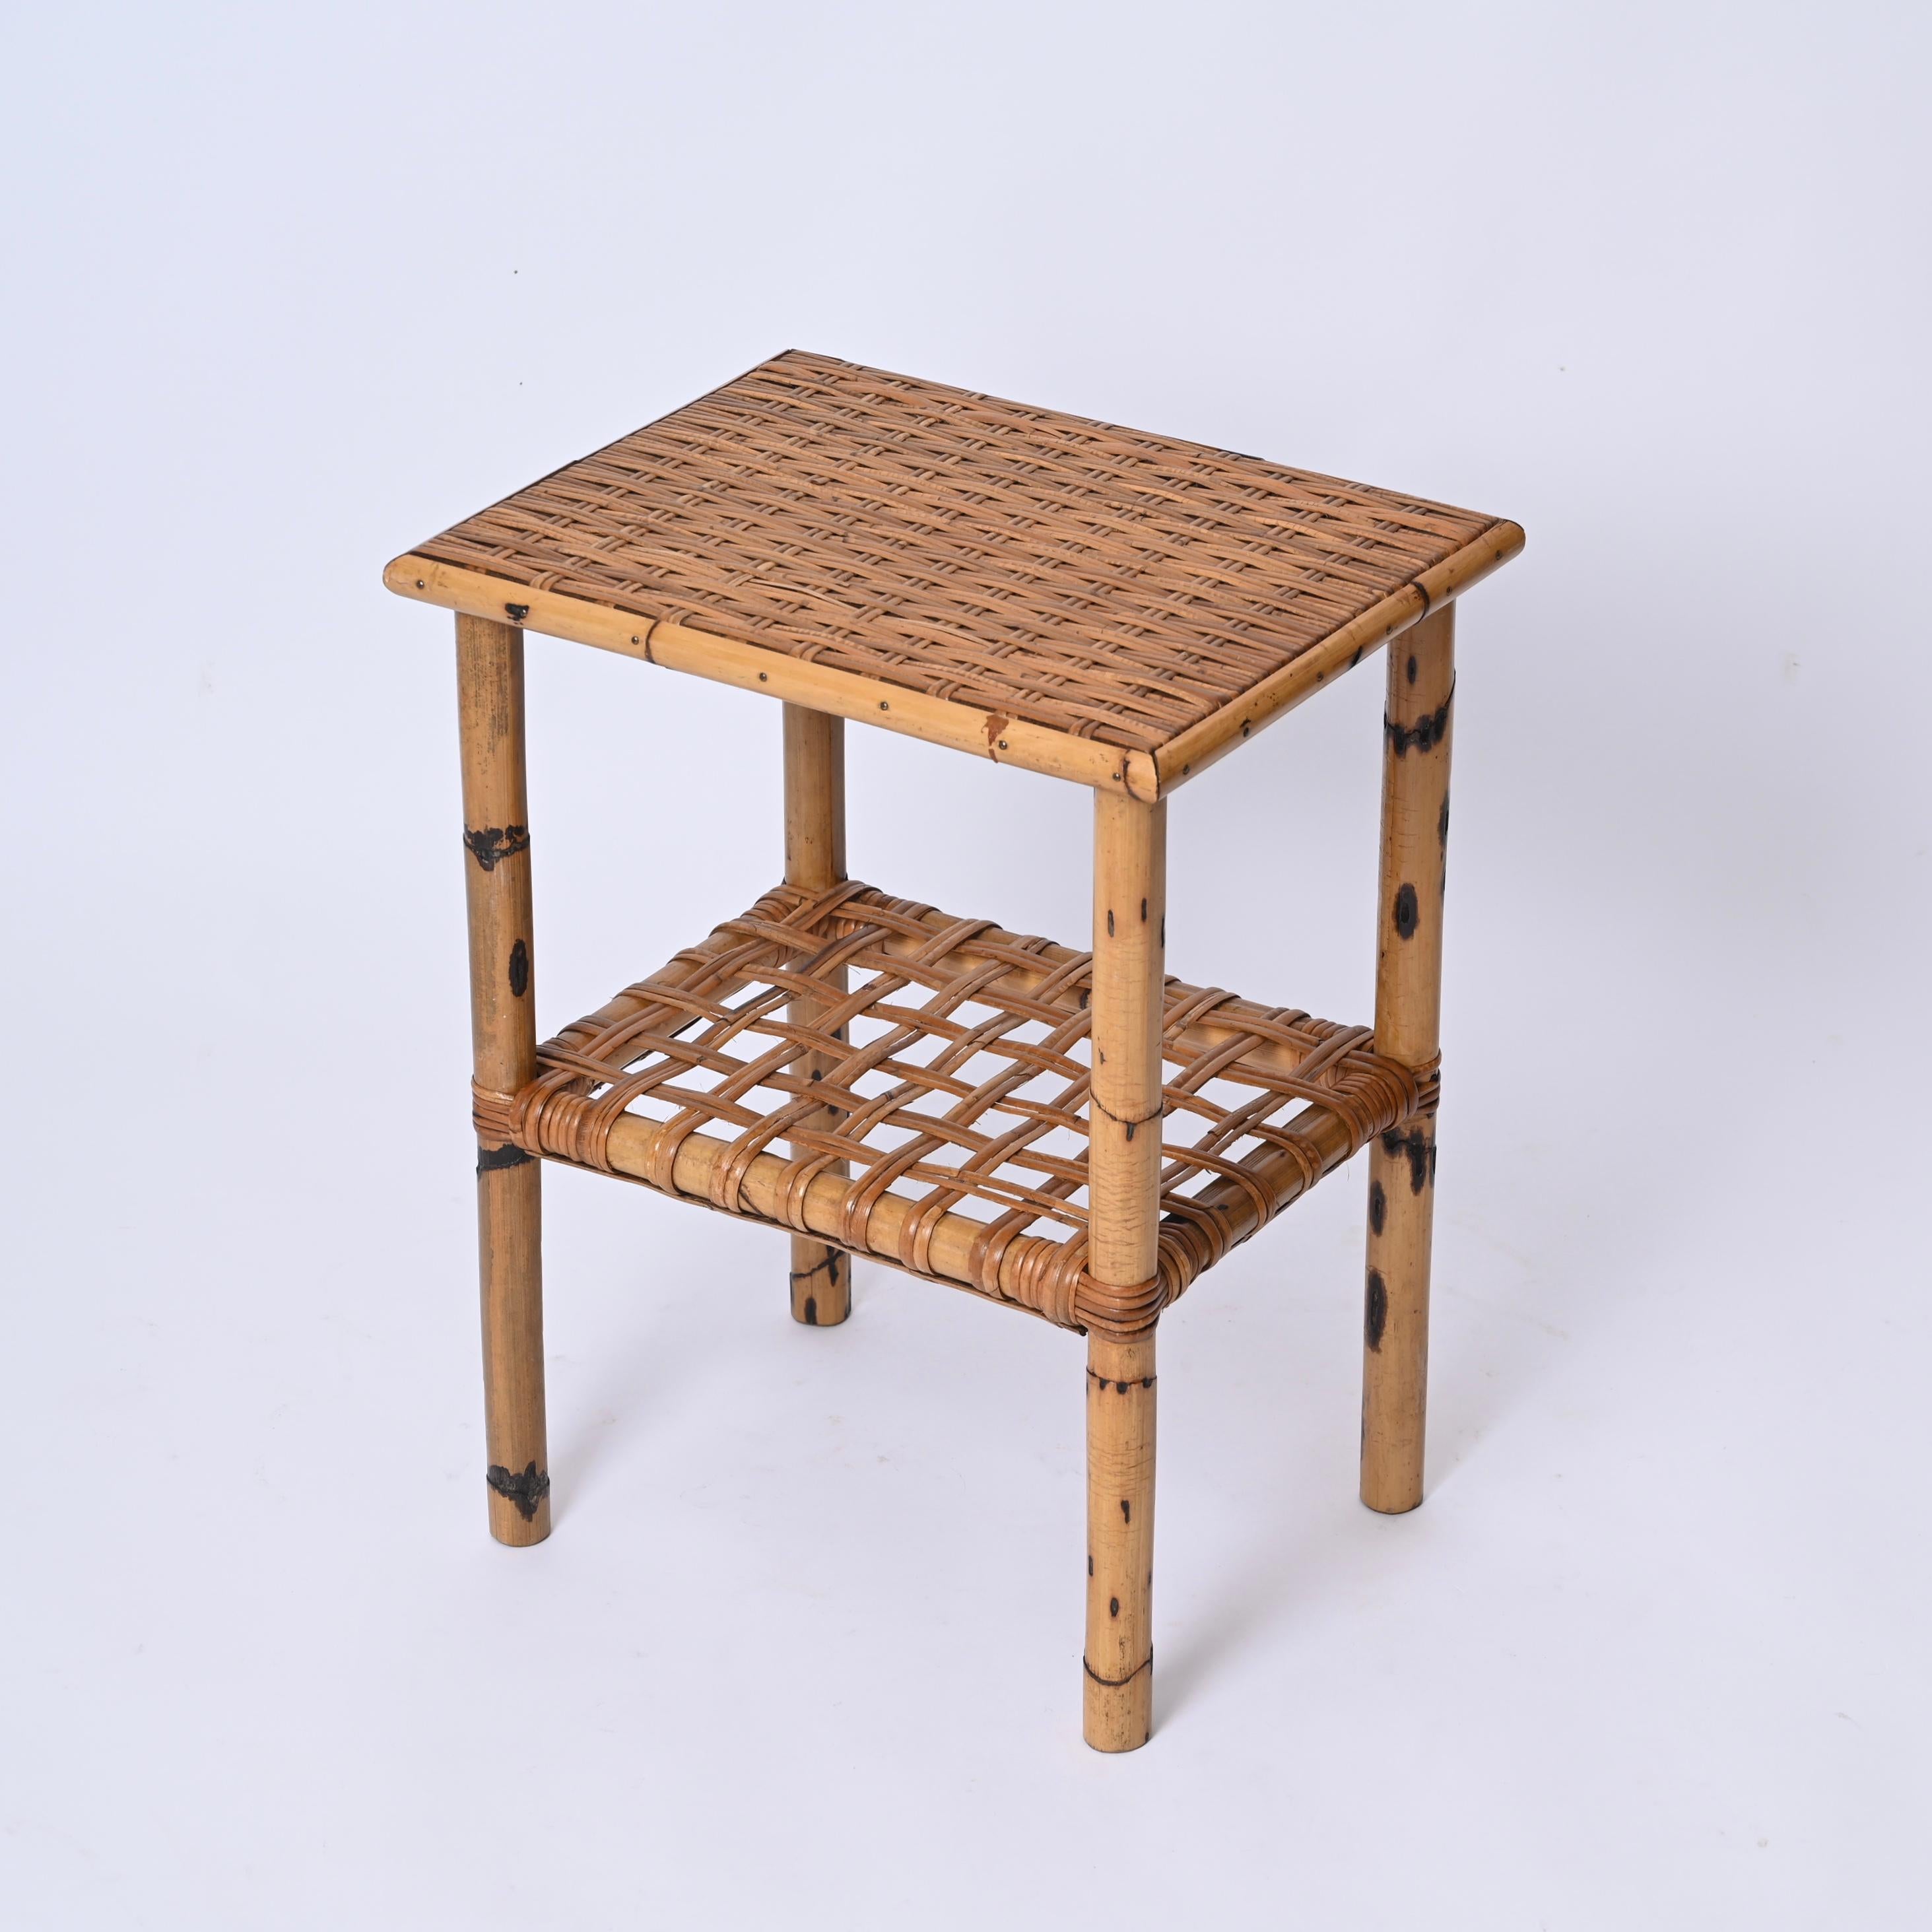 Midcentury Bamboo and Rattan Italian Coffee Table with Magazine Rack, 1960s For Sale 5